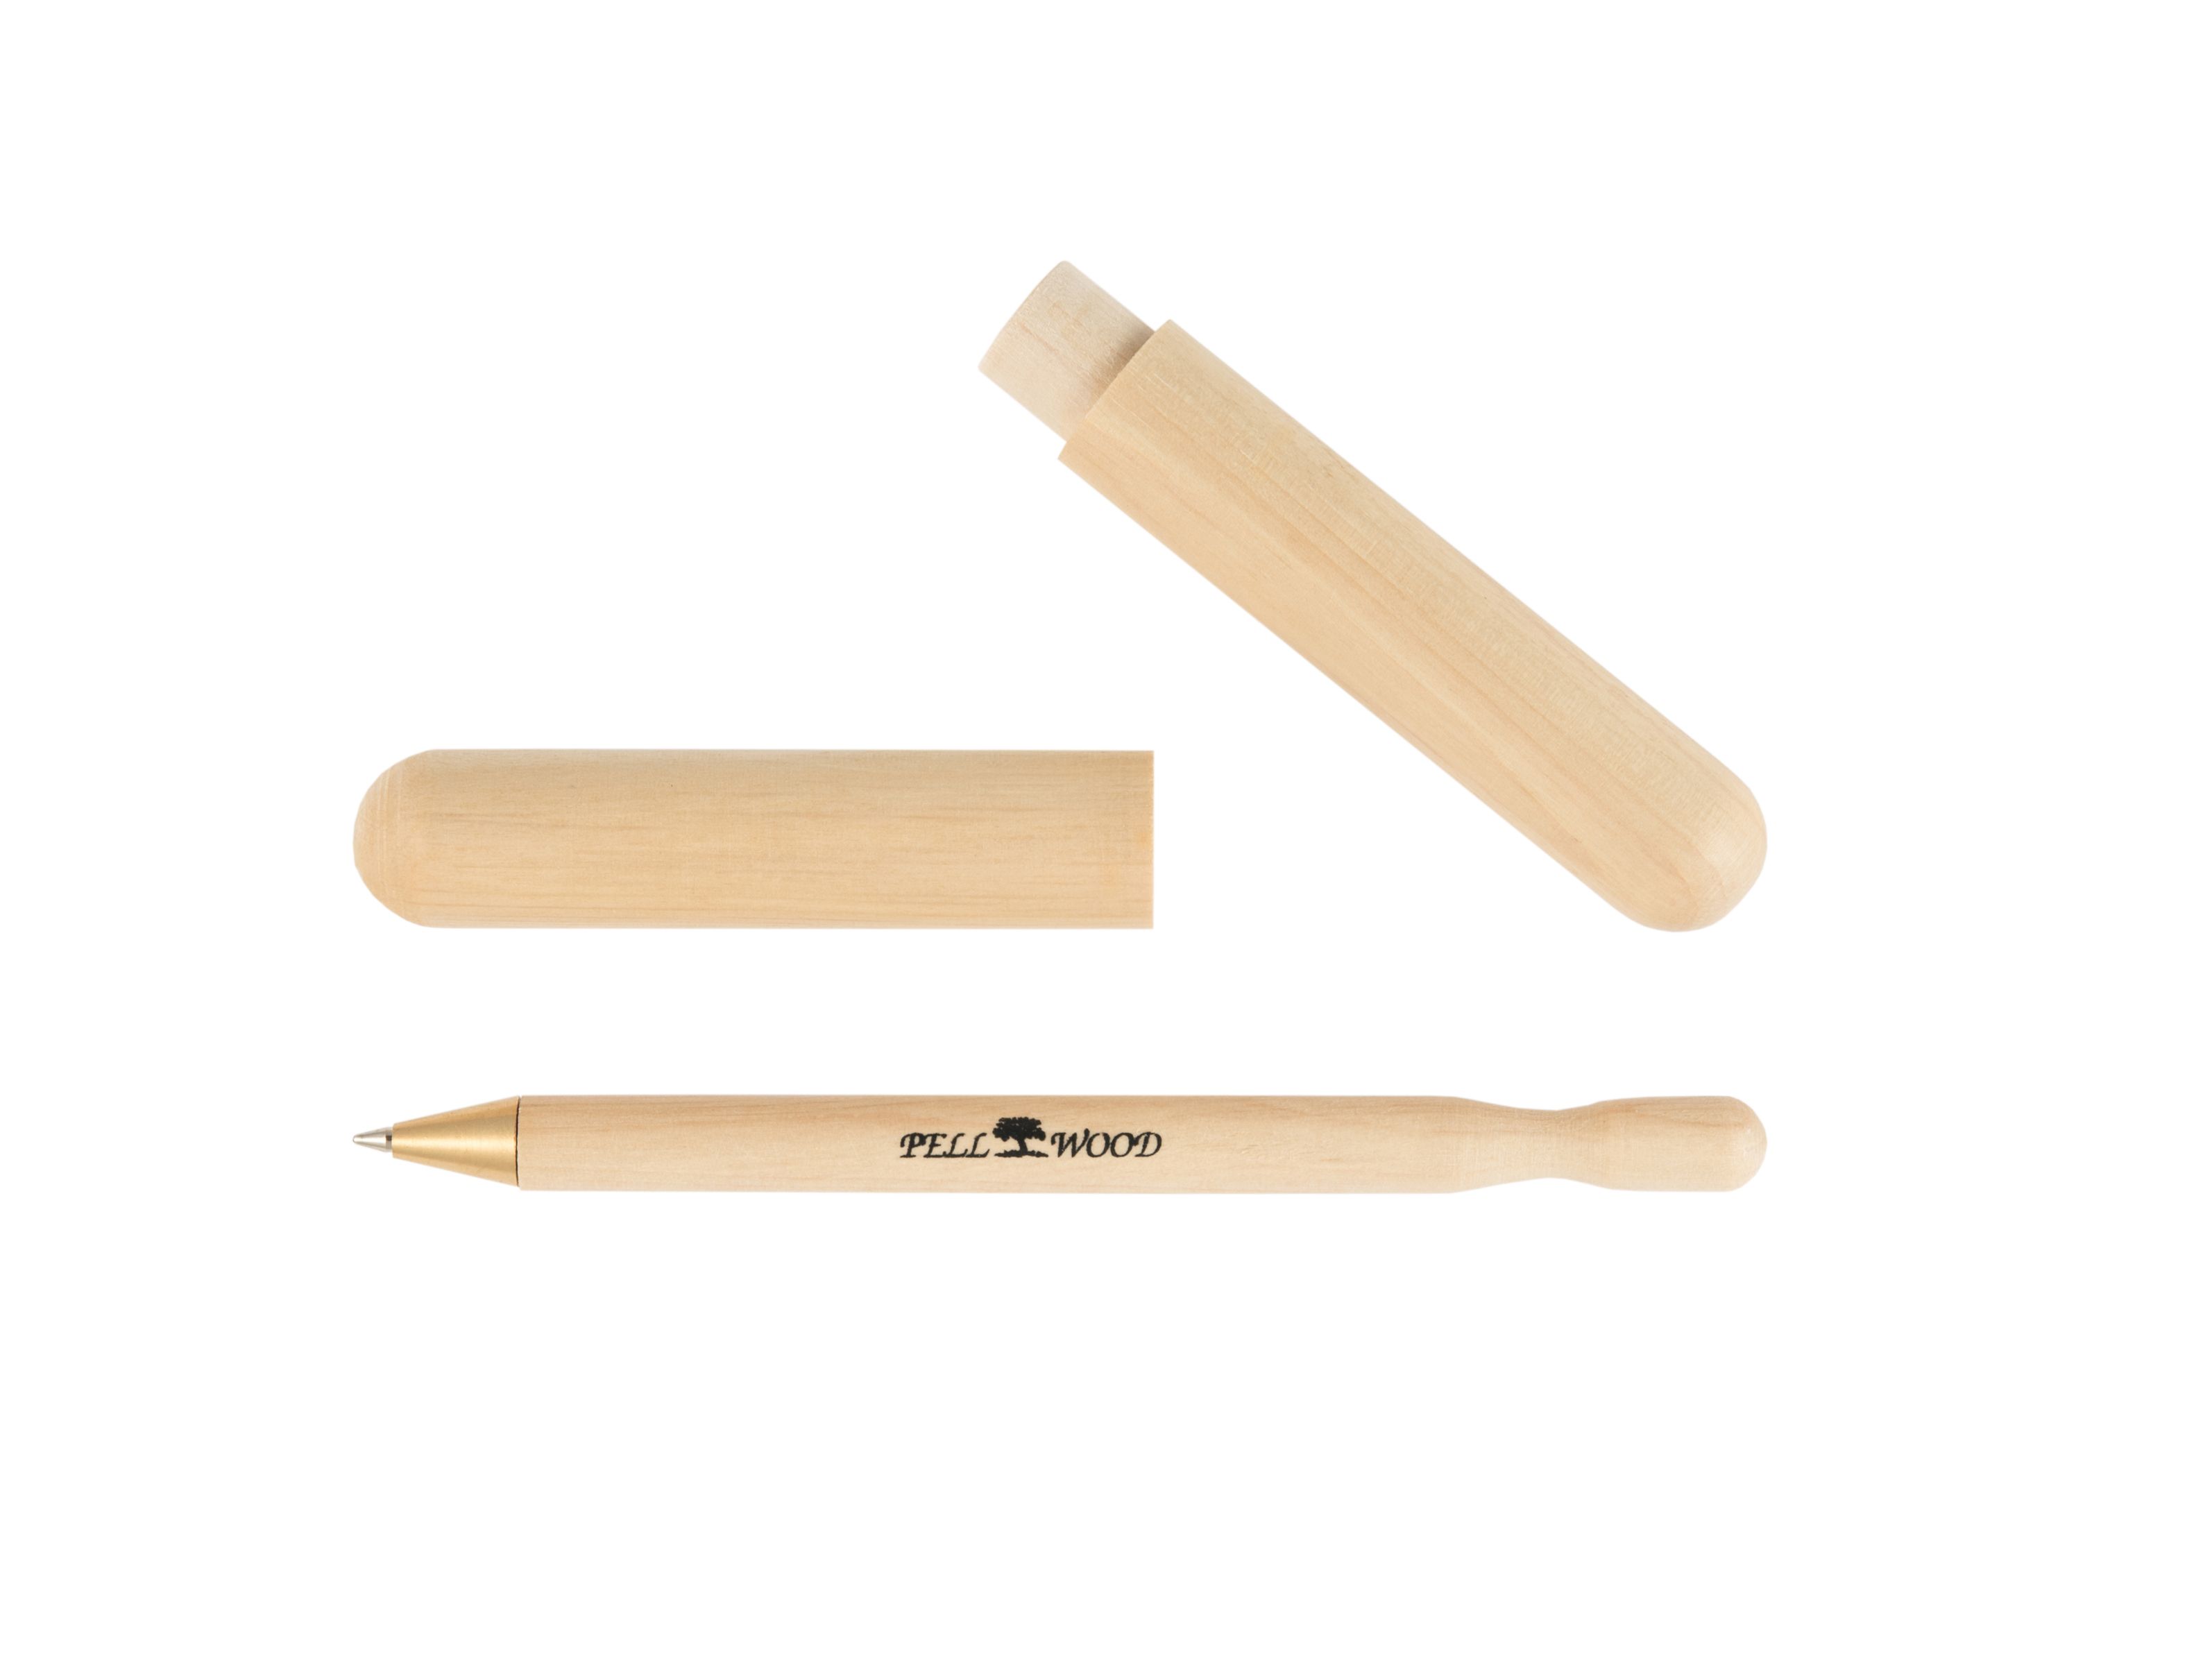 The natural wooden ballpoint pen Pellwood in case